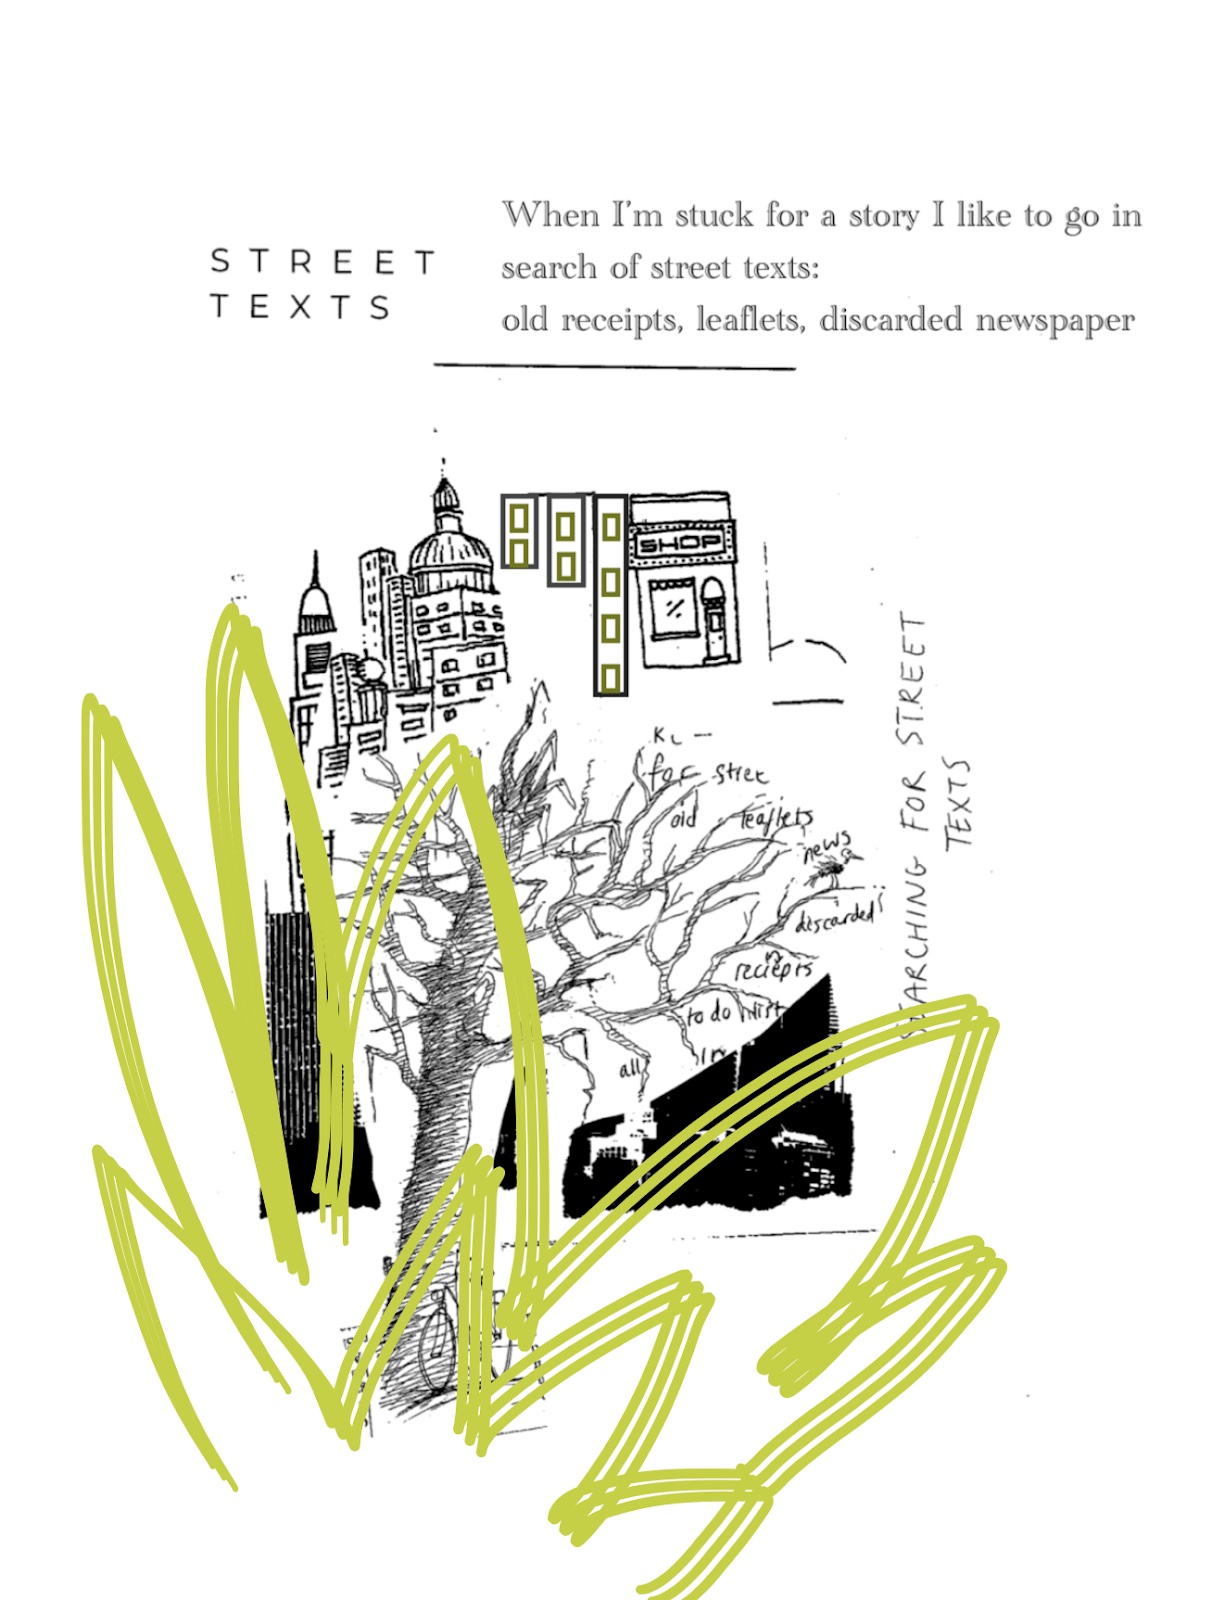 A collage essay from Phoebe McIndoe. The title reads, Street Texts. A city skyline is overlayed by a gnarled, wintry tree, it’s leaves bare. A green zigzag marking scrawled across its surface and a handwritten note, “Searching for Street Texts”. Writing in the top right corner says, When I’m stuck for a story I like to go in search of street texts: old receipts, leaflets, discarded newspaper.